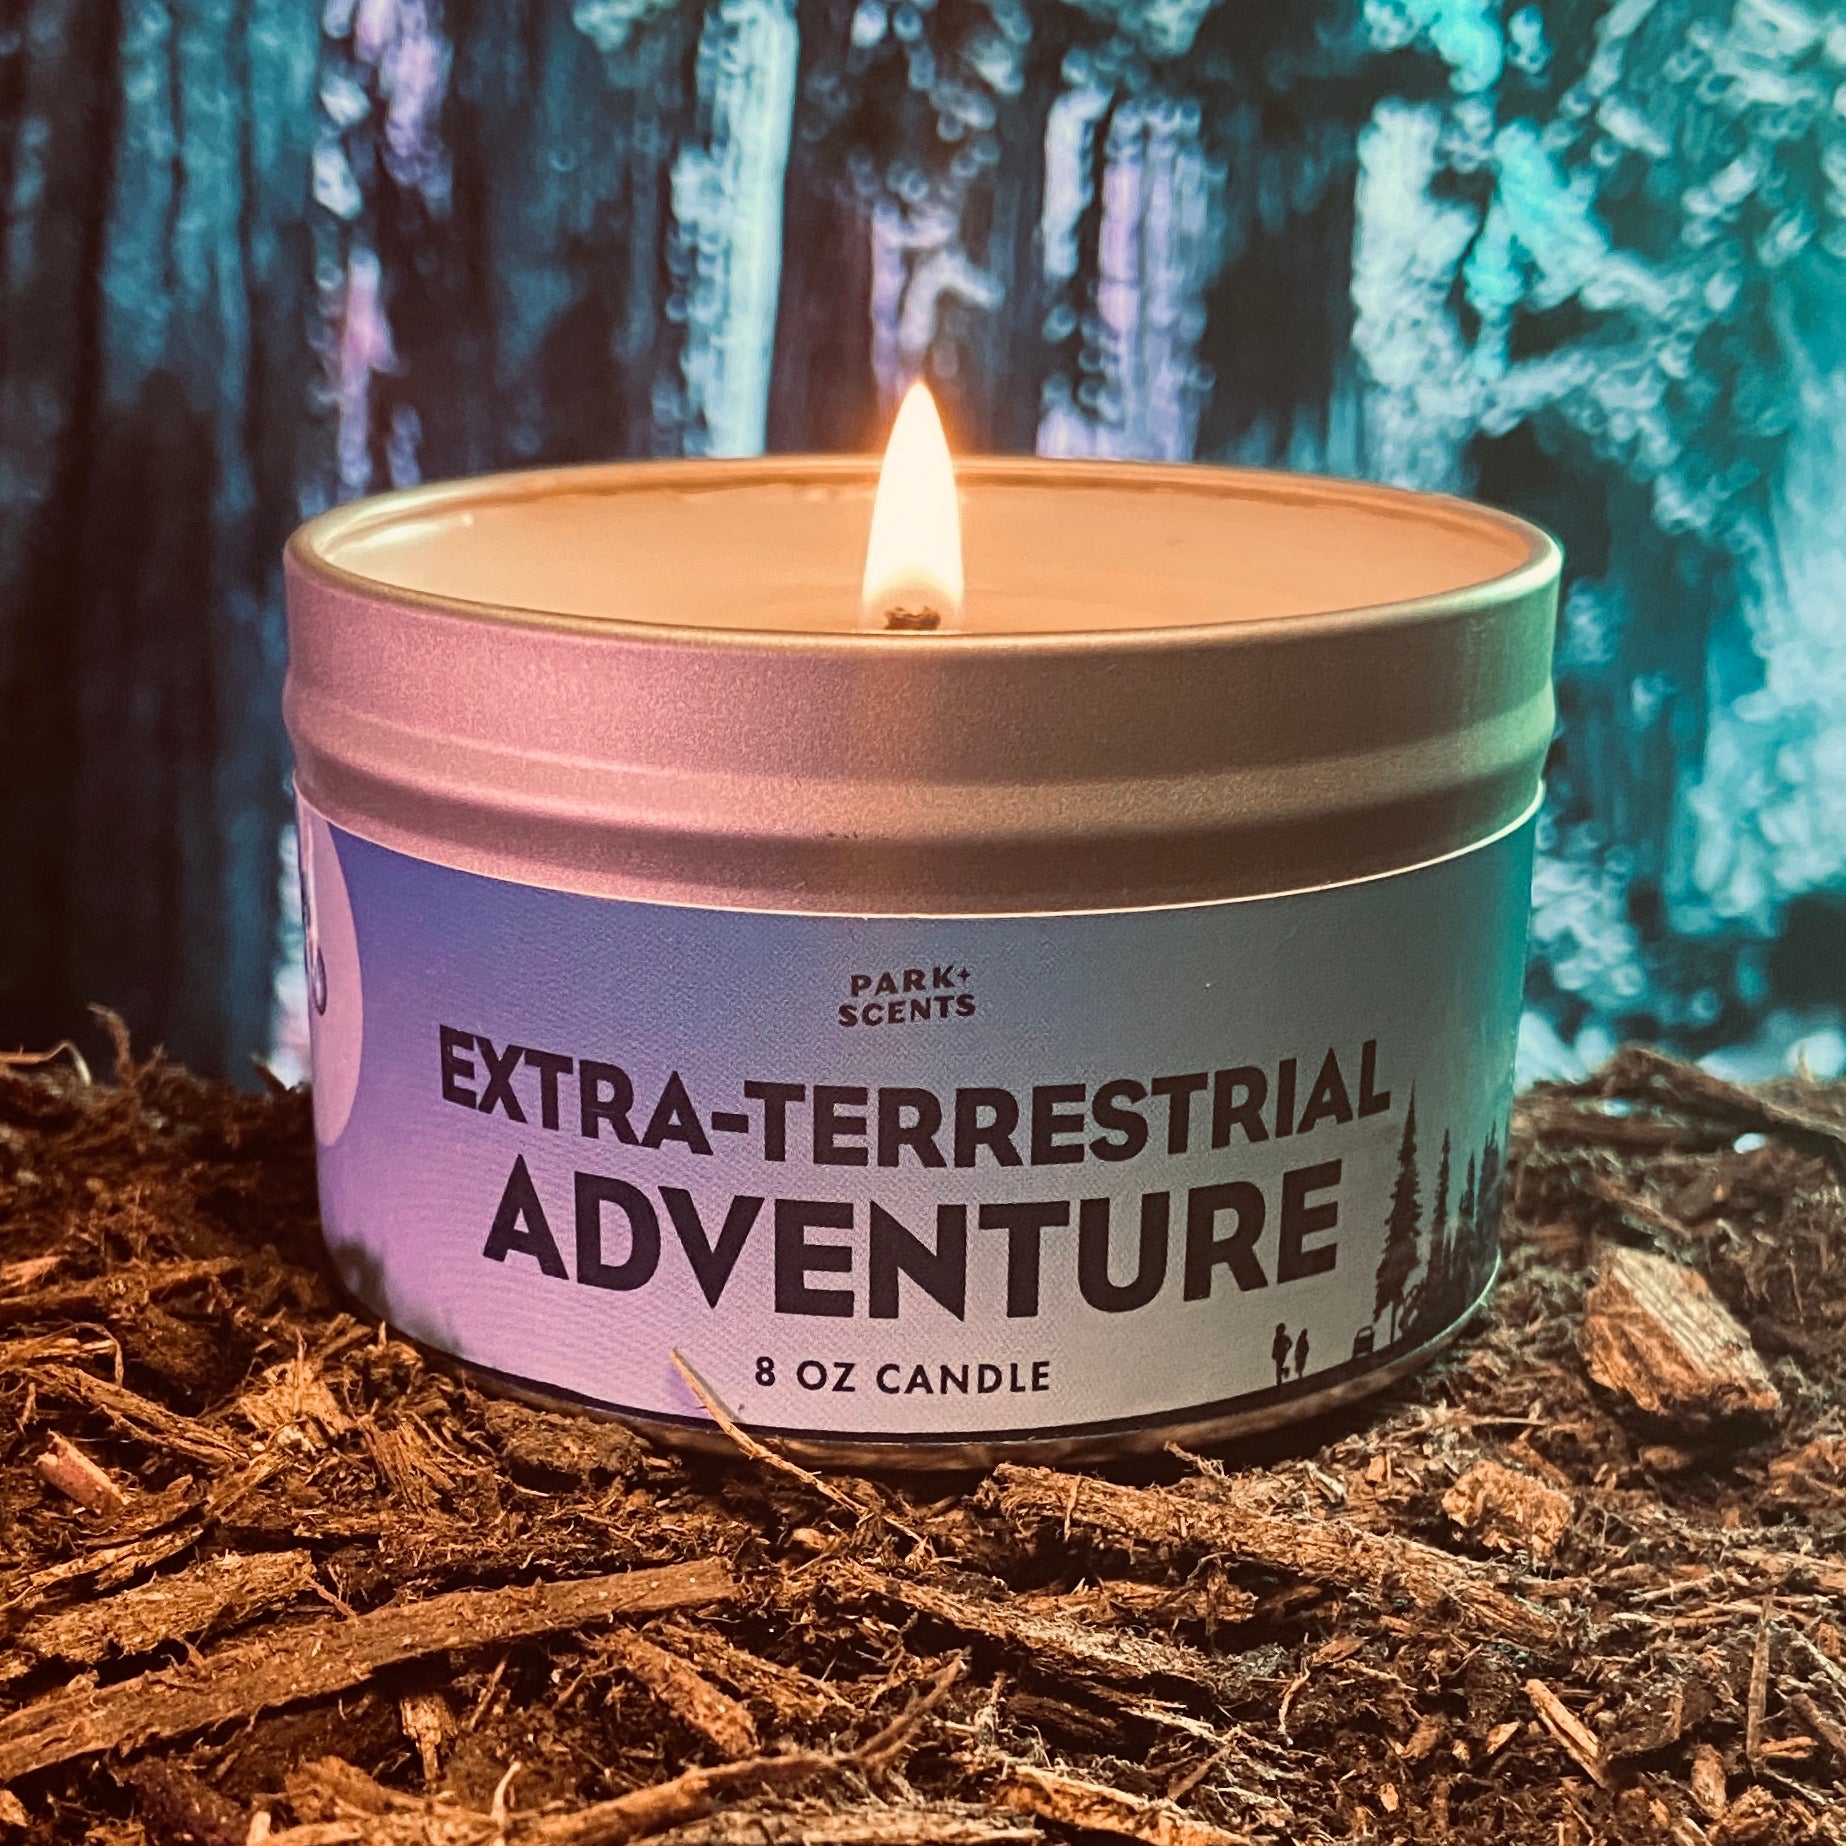 Theme-park scents spark creation of Celebration-based candle